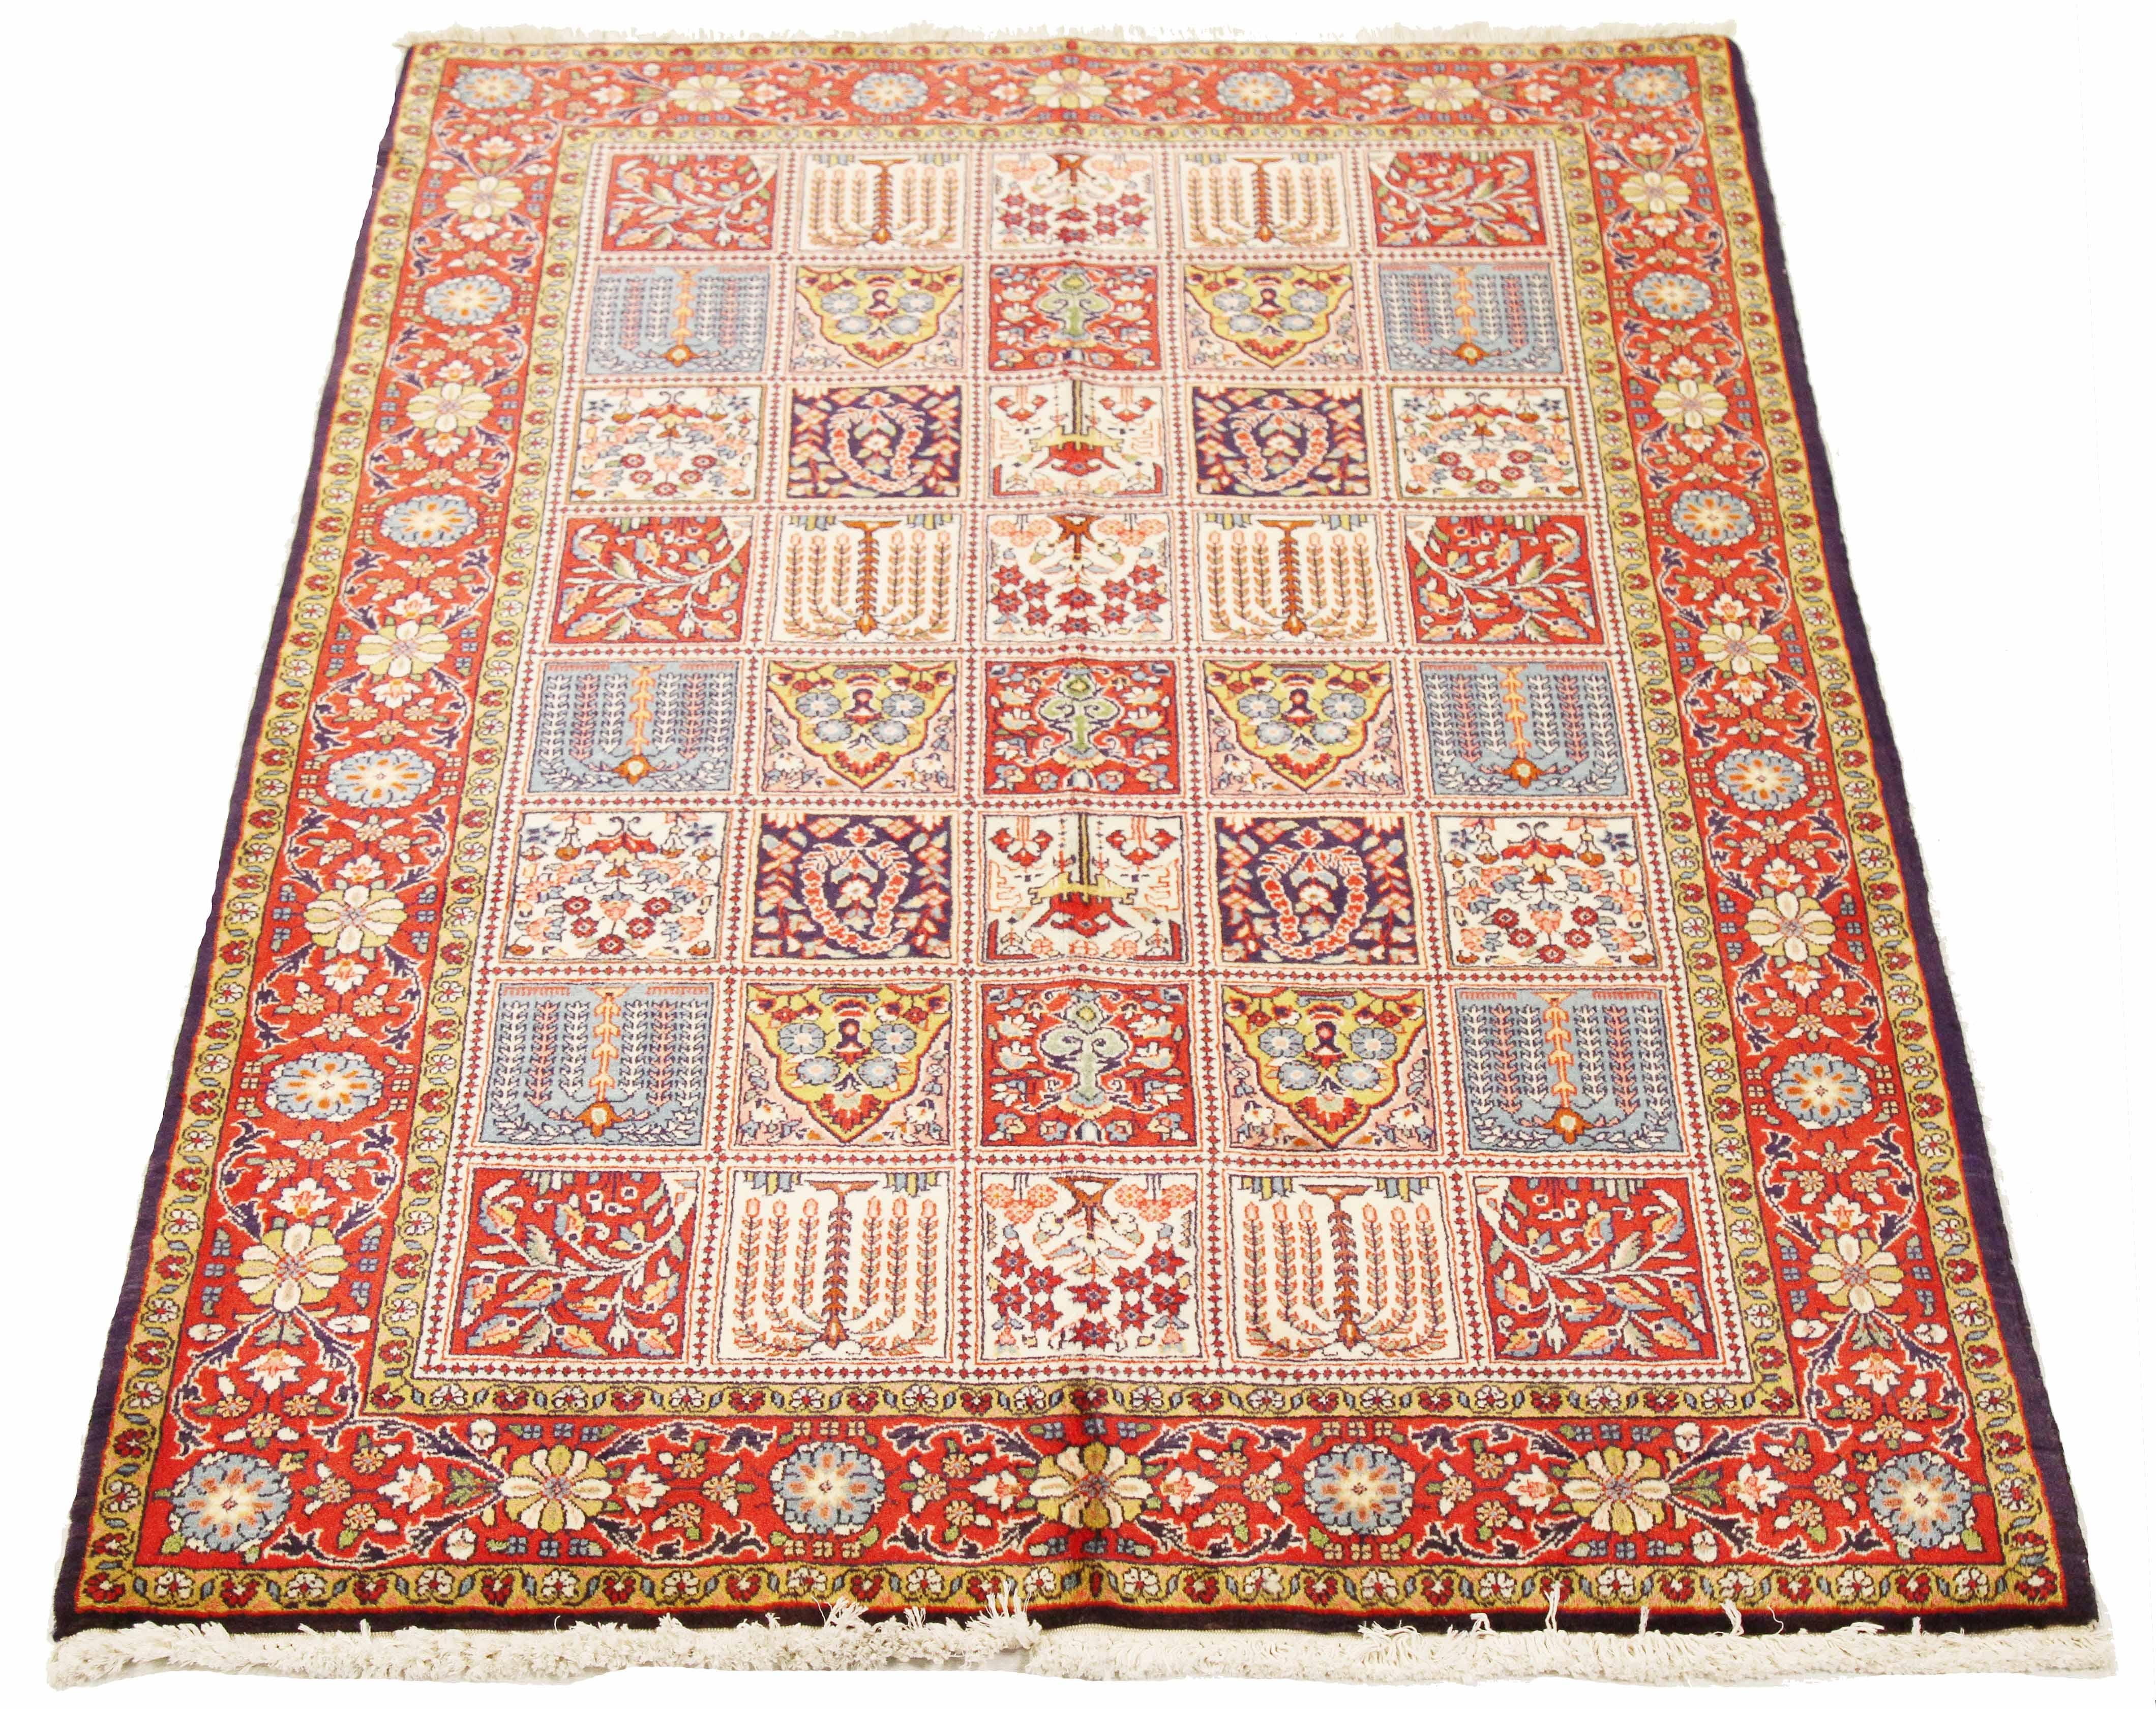 Vintage Persian rug handwoven from the finest sheep’s wool and colored with all-natural vegetable dyes that are safe for humans and pets. It’s a traditional Sarouk design featuring colored tiles with each one filled with exquisite floral and